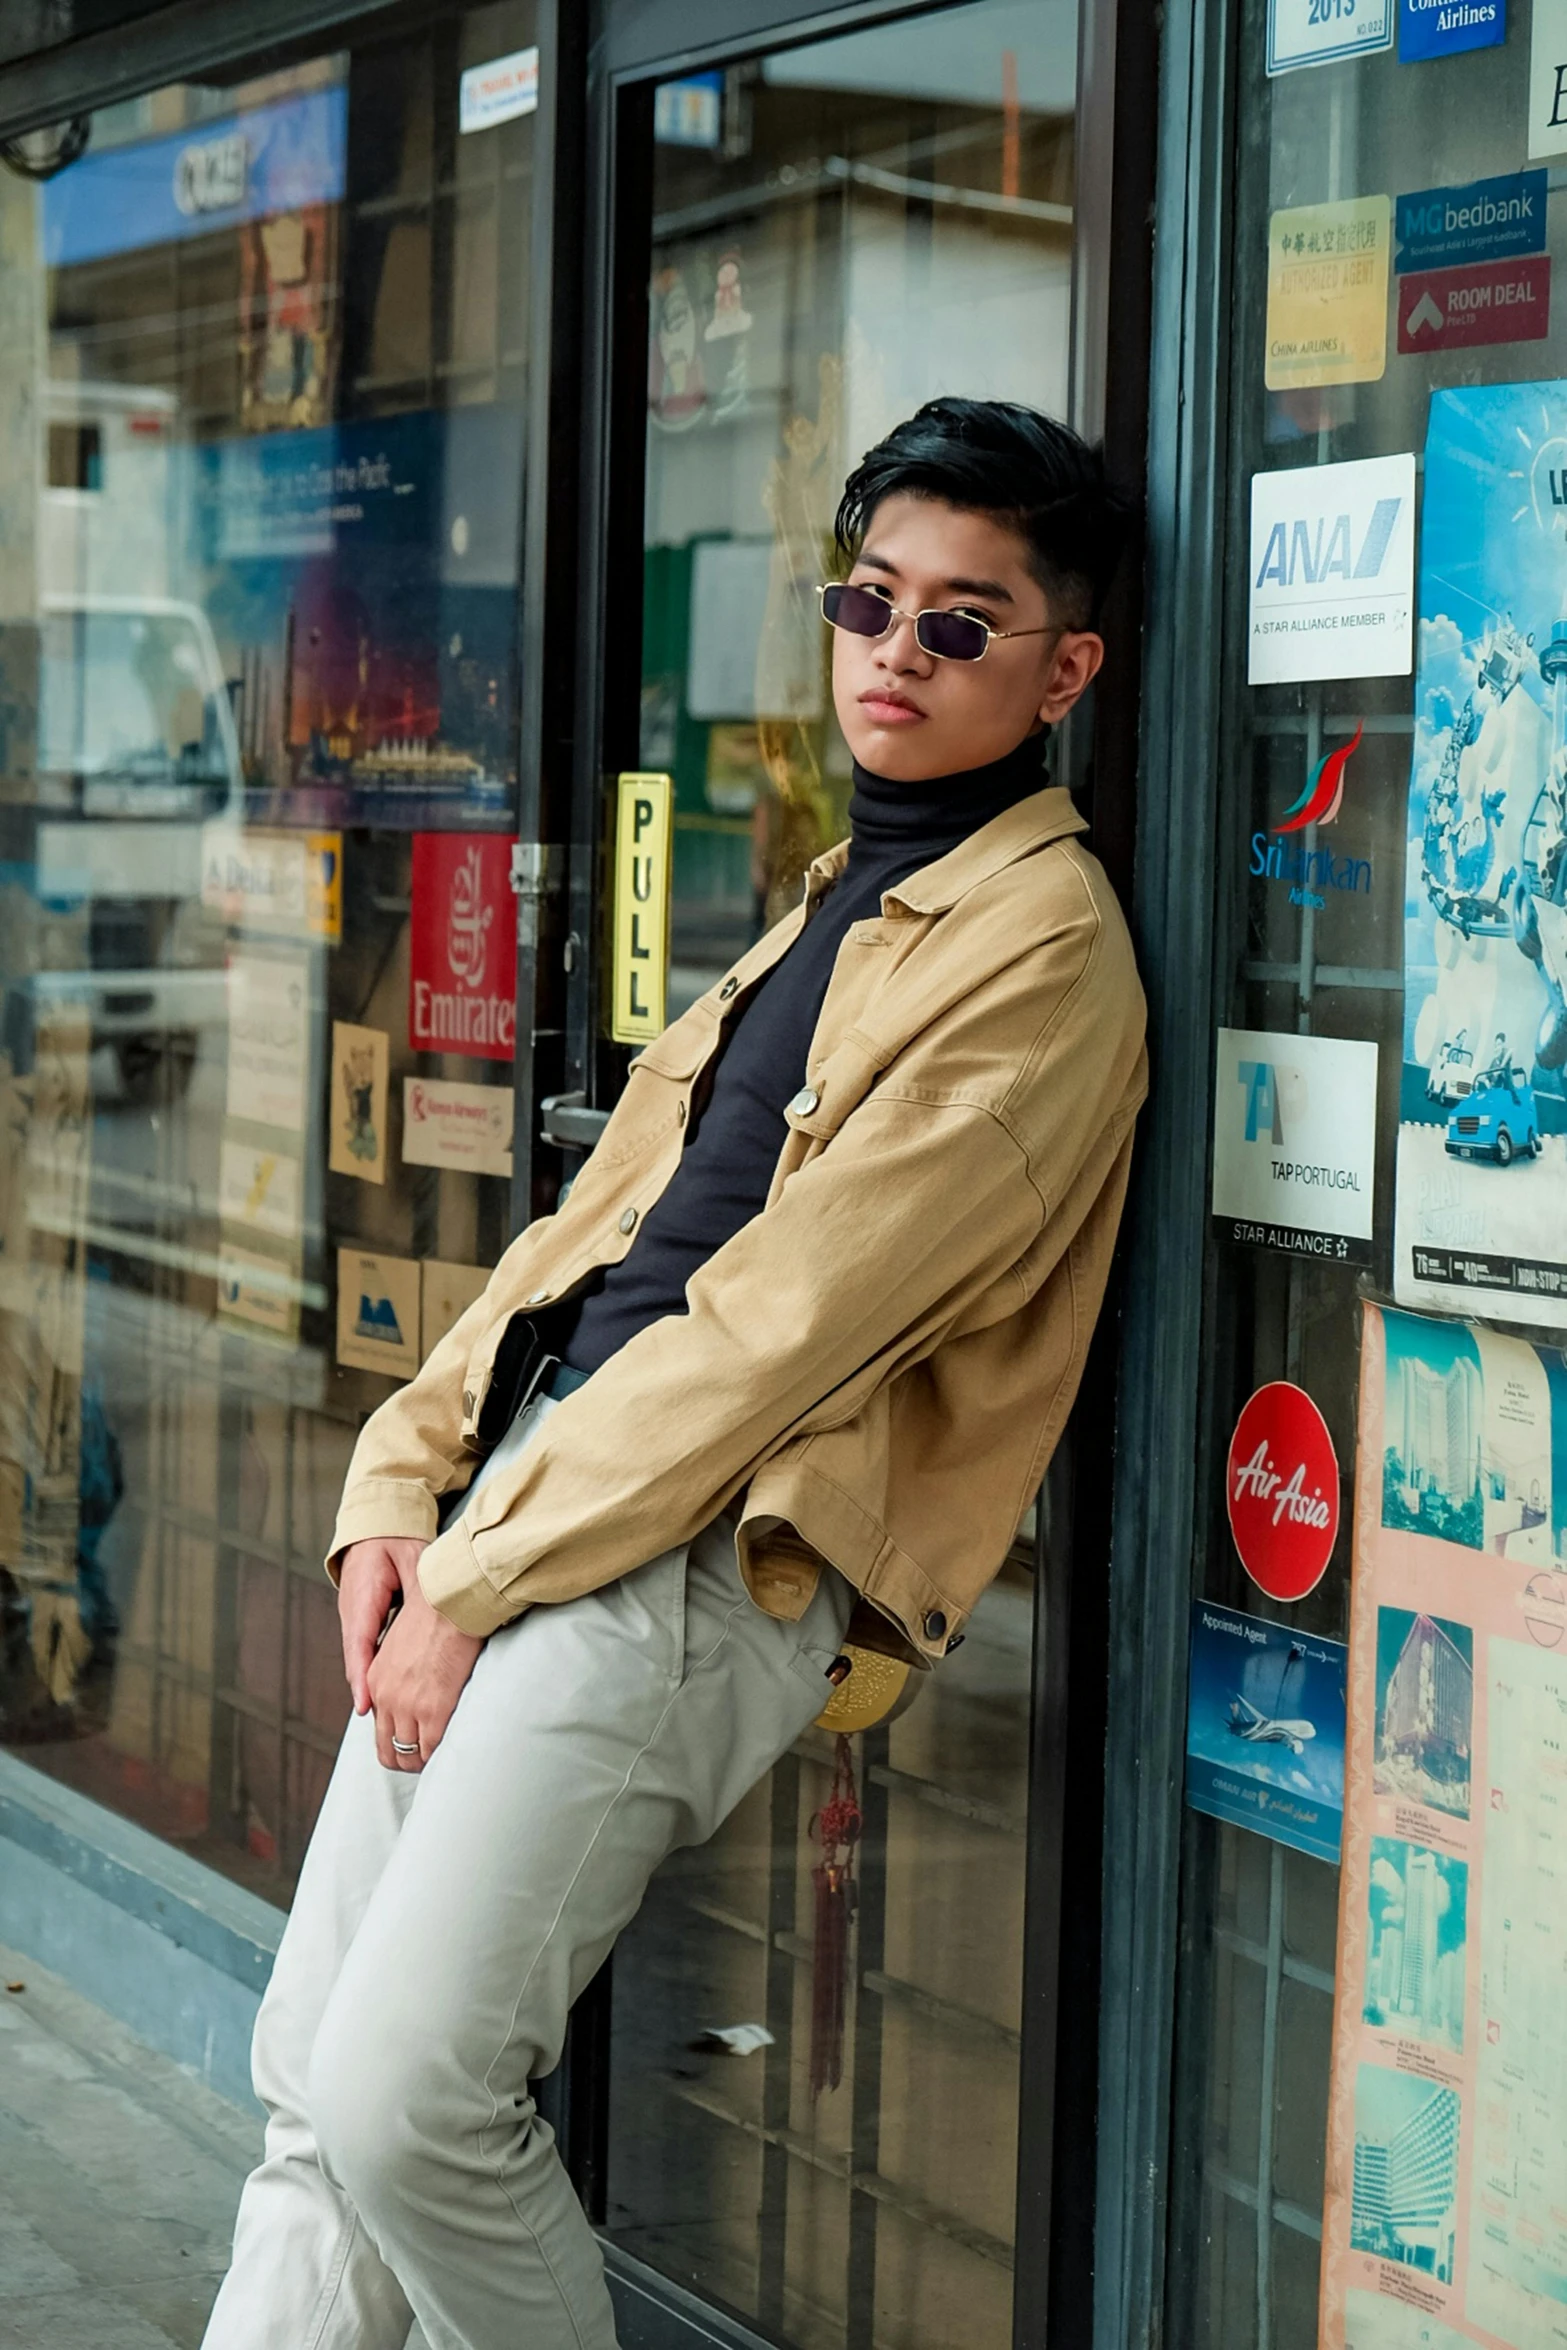 a man leaning against a wall in front of a store, an album cover, pexels contest winner, androgynous person, stanley artgem lau, with sunglass, khakis